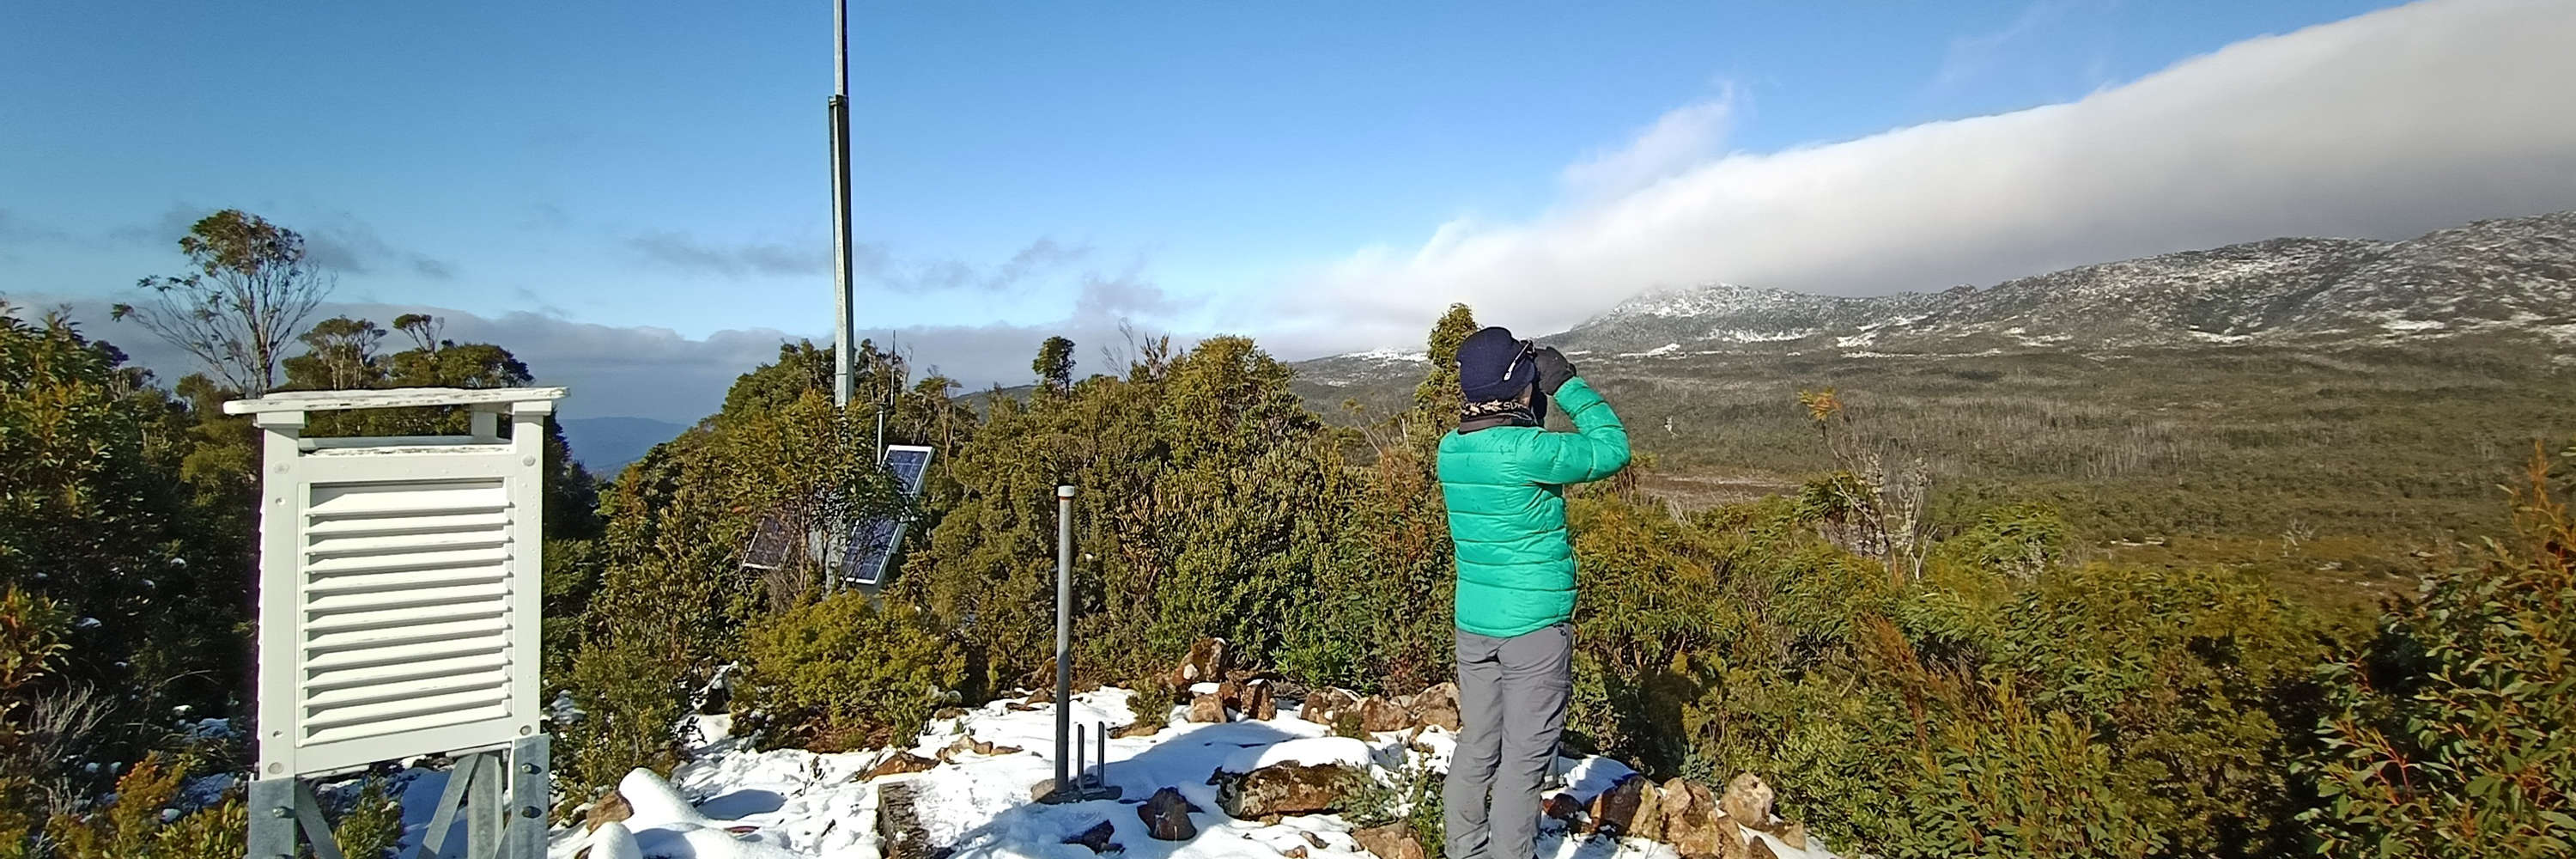 A warmly-dressed woman standing on snowy heathland beside a weather station(?) surveys for Where? Where? Wedgie! Facing away from us, she points binoculars towards a snowy ridge. The sky is very blue, with cloud over the ridge. Photo: Stephen Anstee.